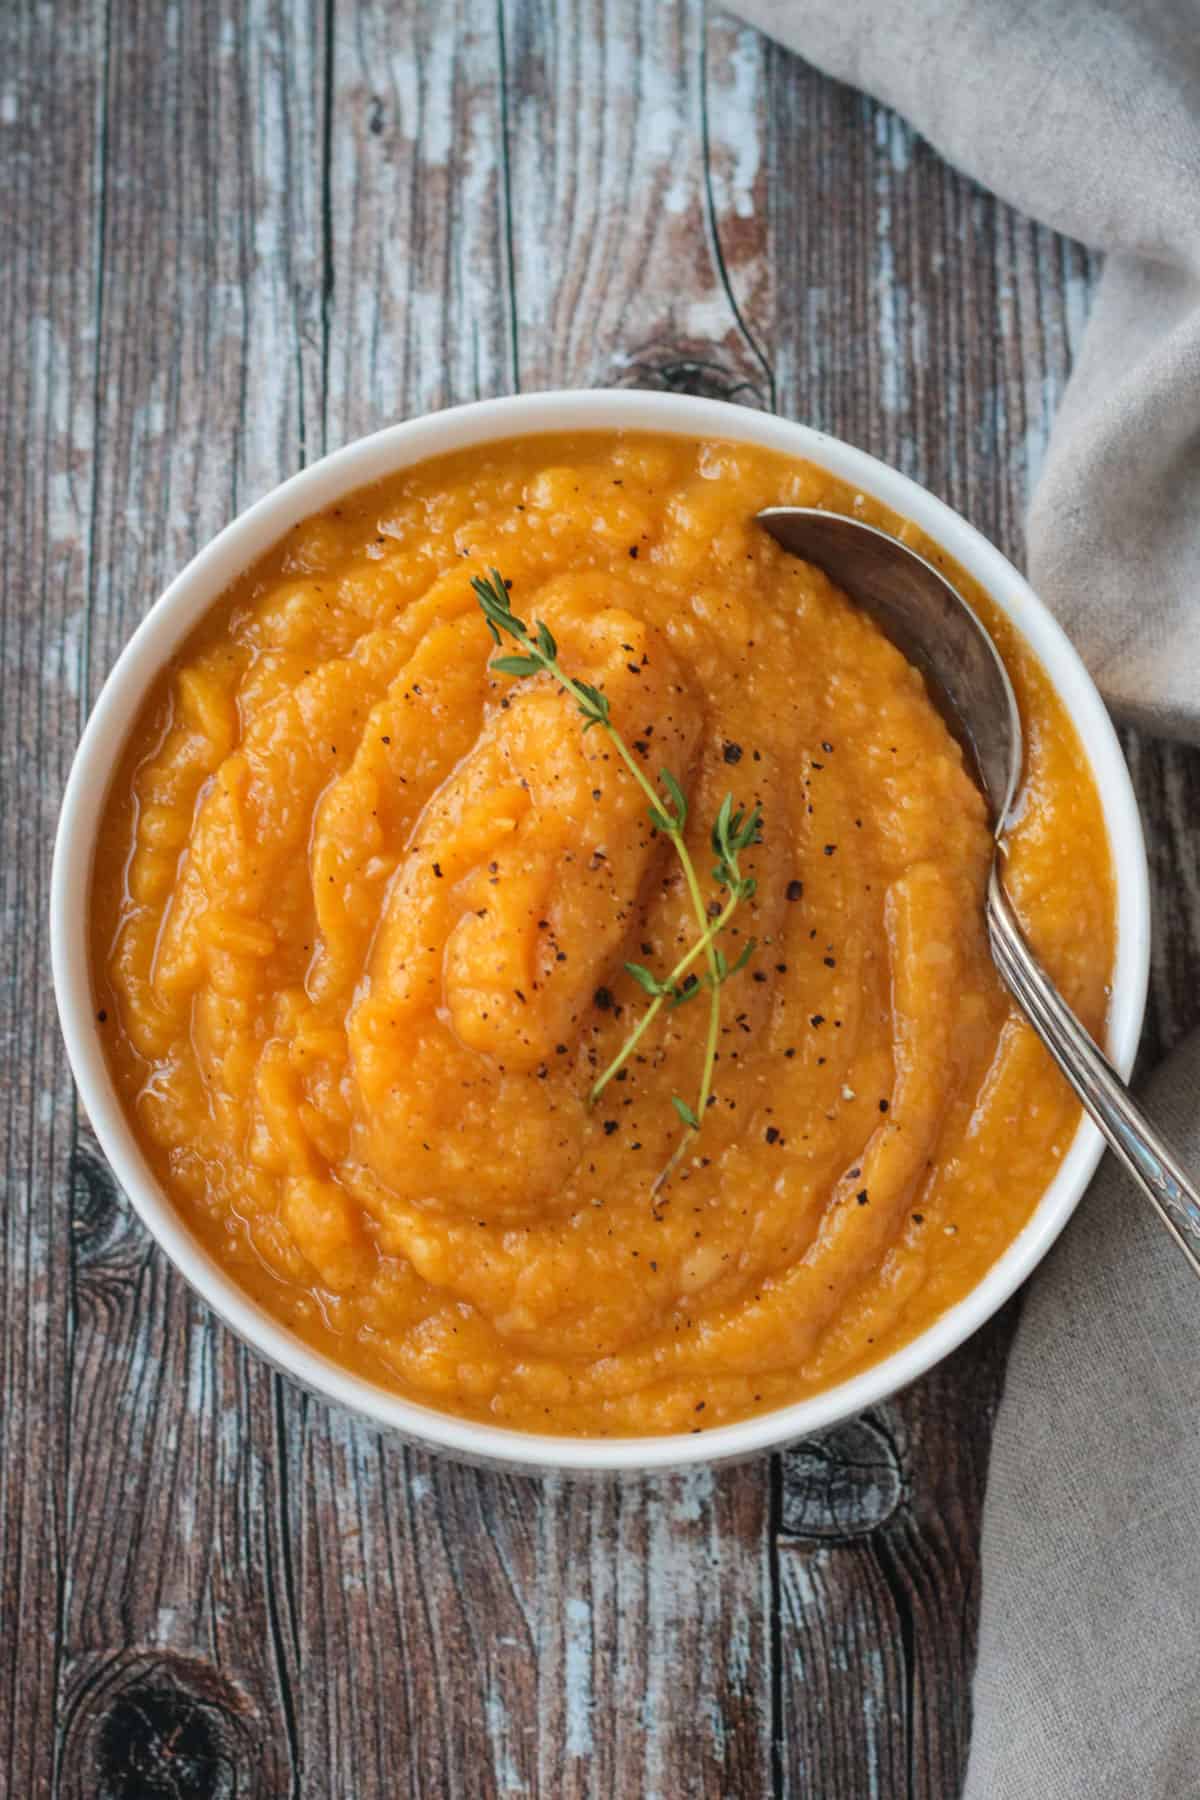 Overhead view of a bowl of butternut squash mash garnished with two sprigs of fresh thyme.